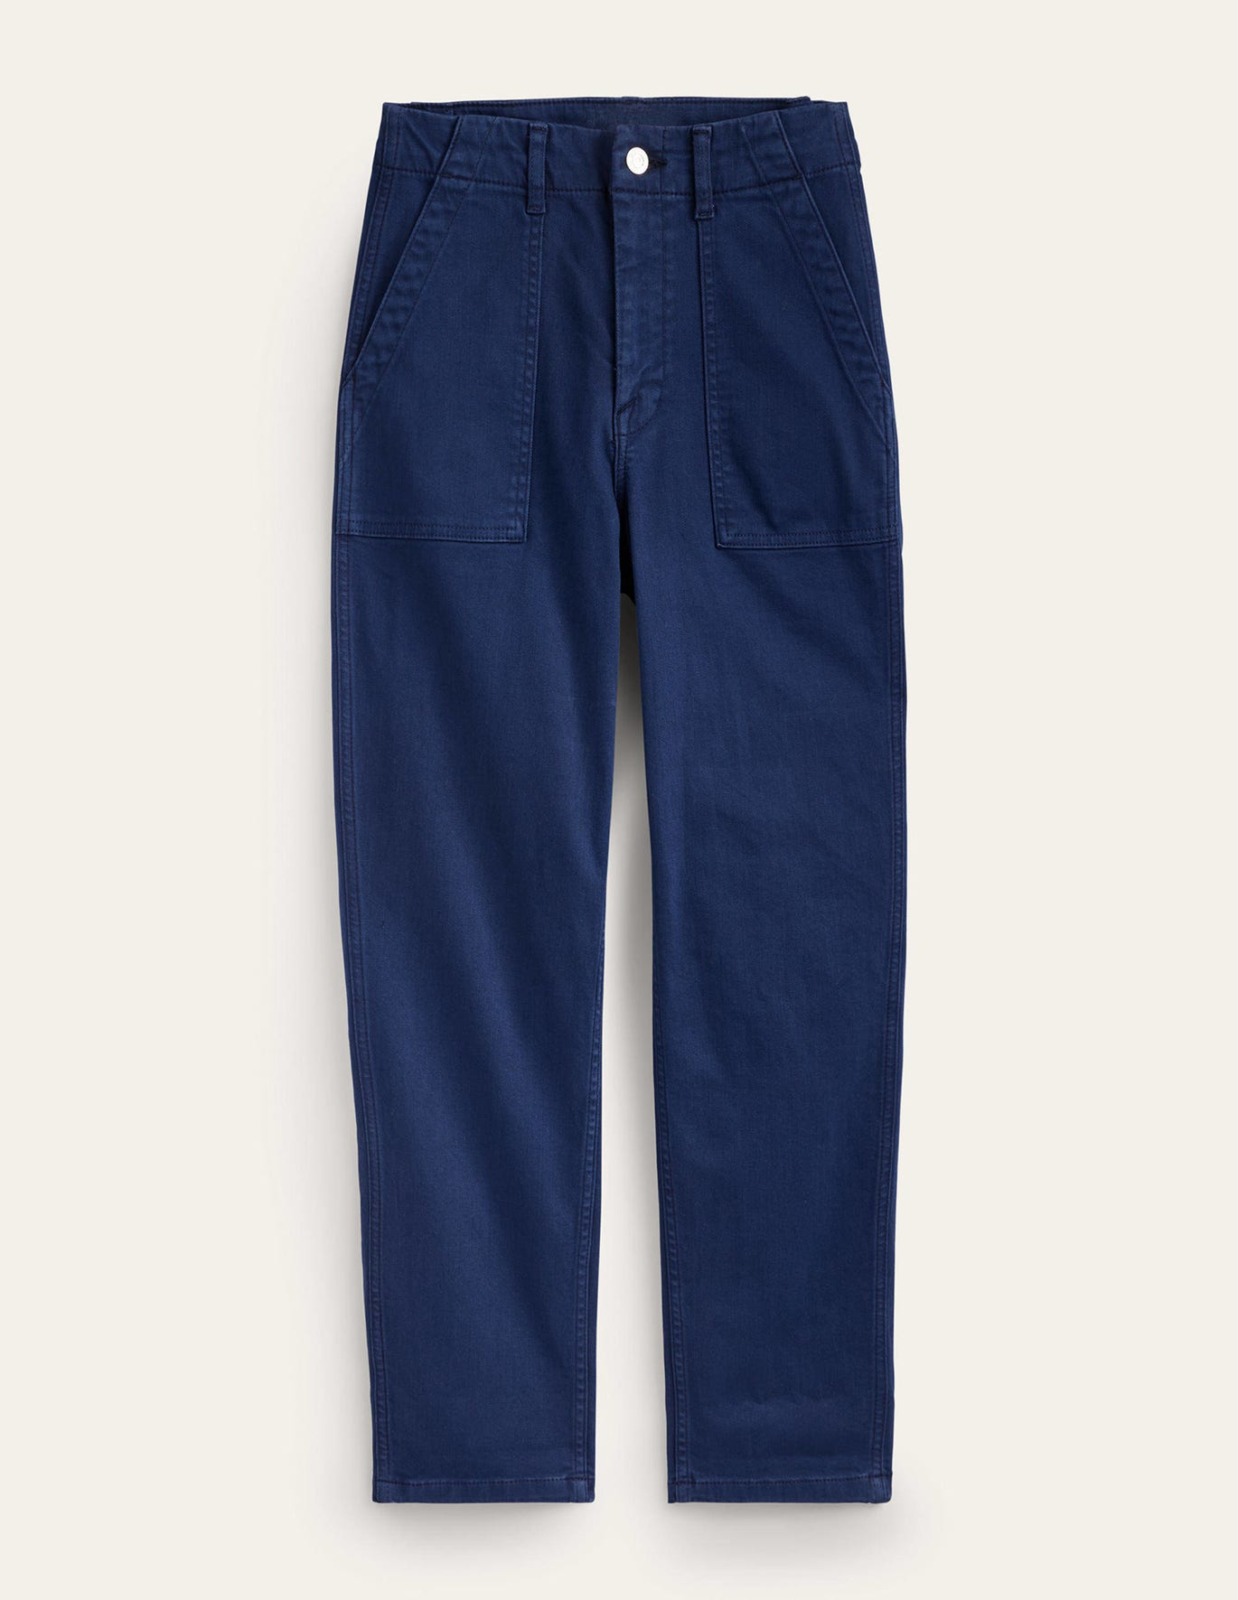 Boden - Lady Blue Trousers GOOFASH